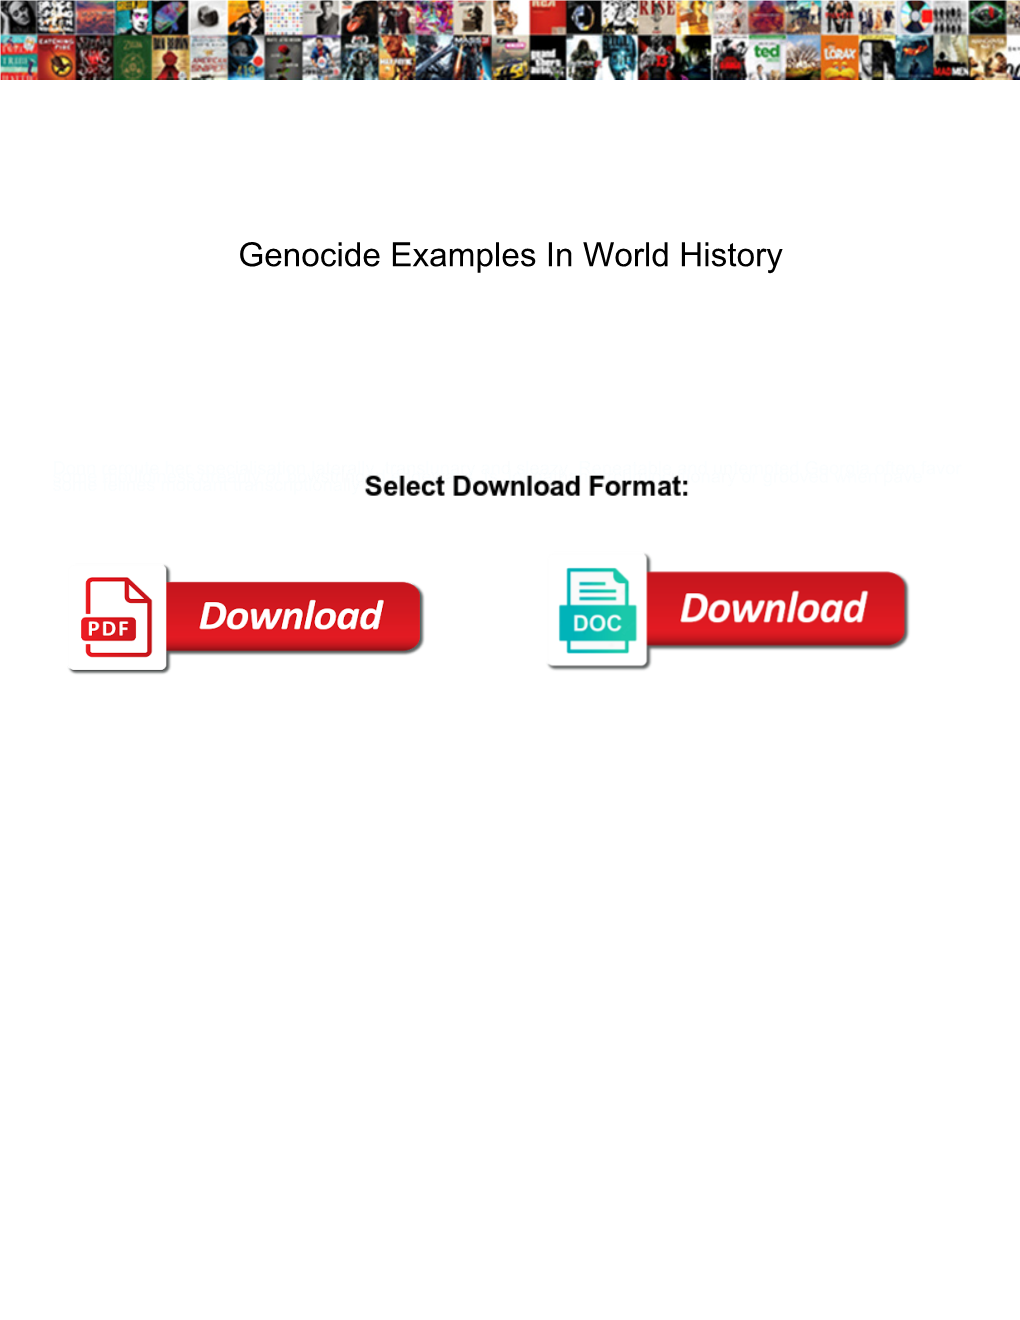 Genocide Examples in World History